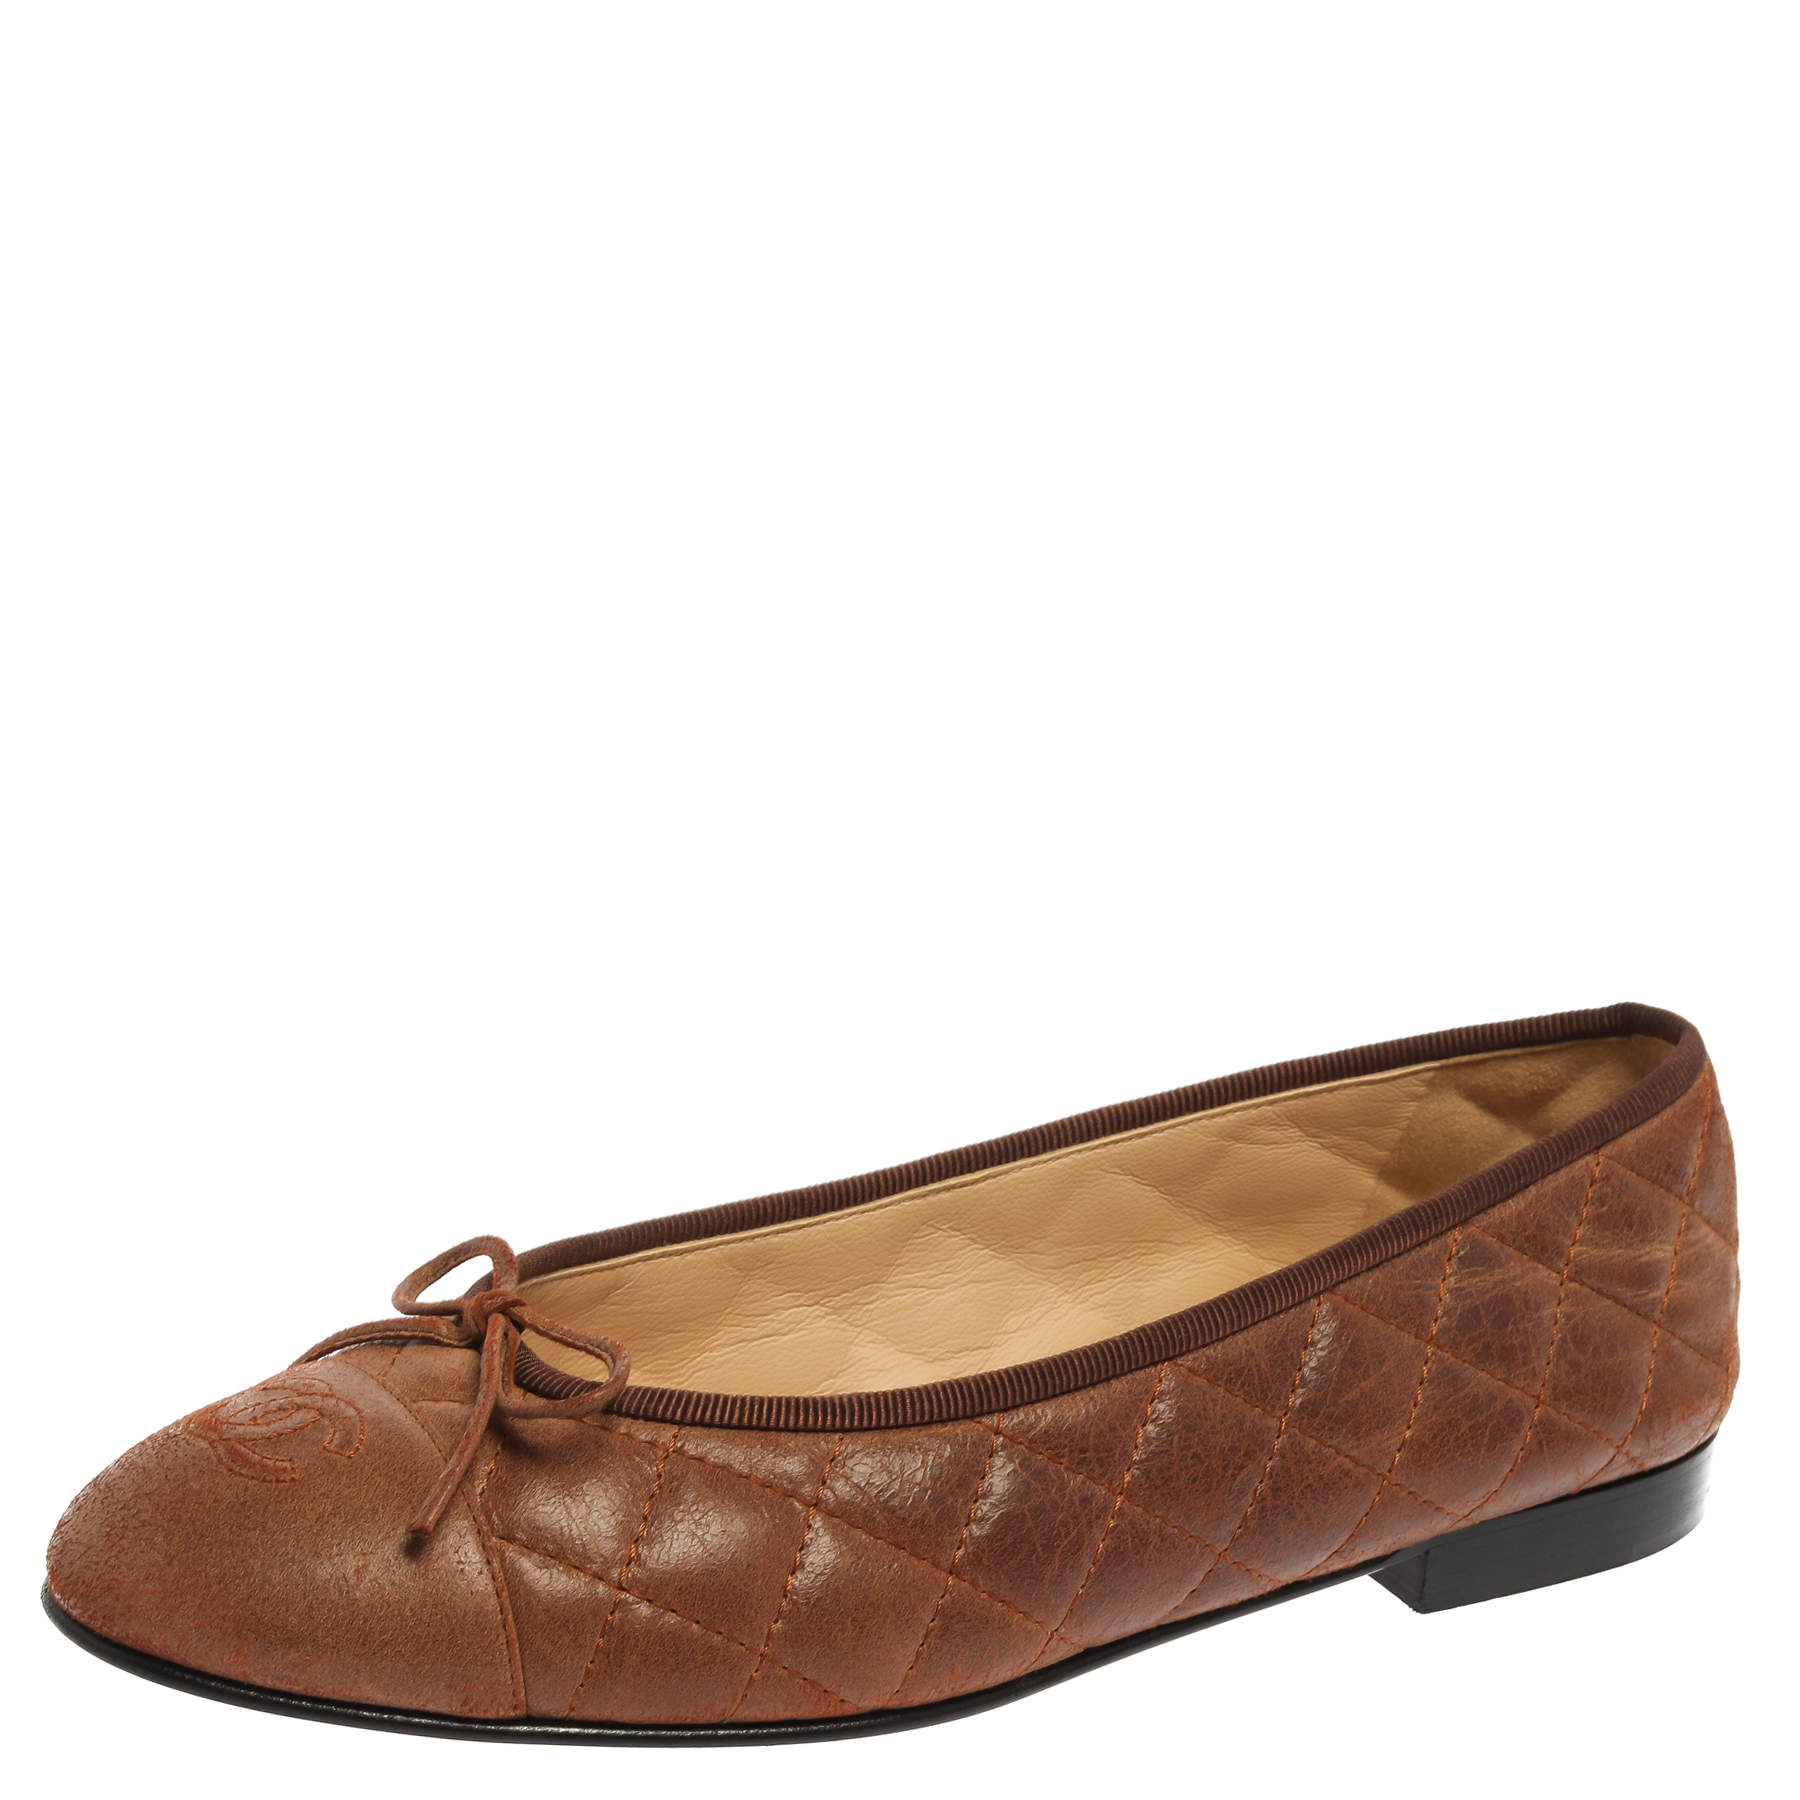 Chanel Brown Quilted Leather CC Bow Ballet Flats Size 39 Chanel